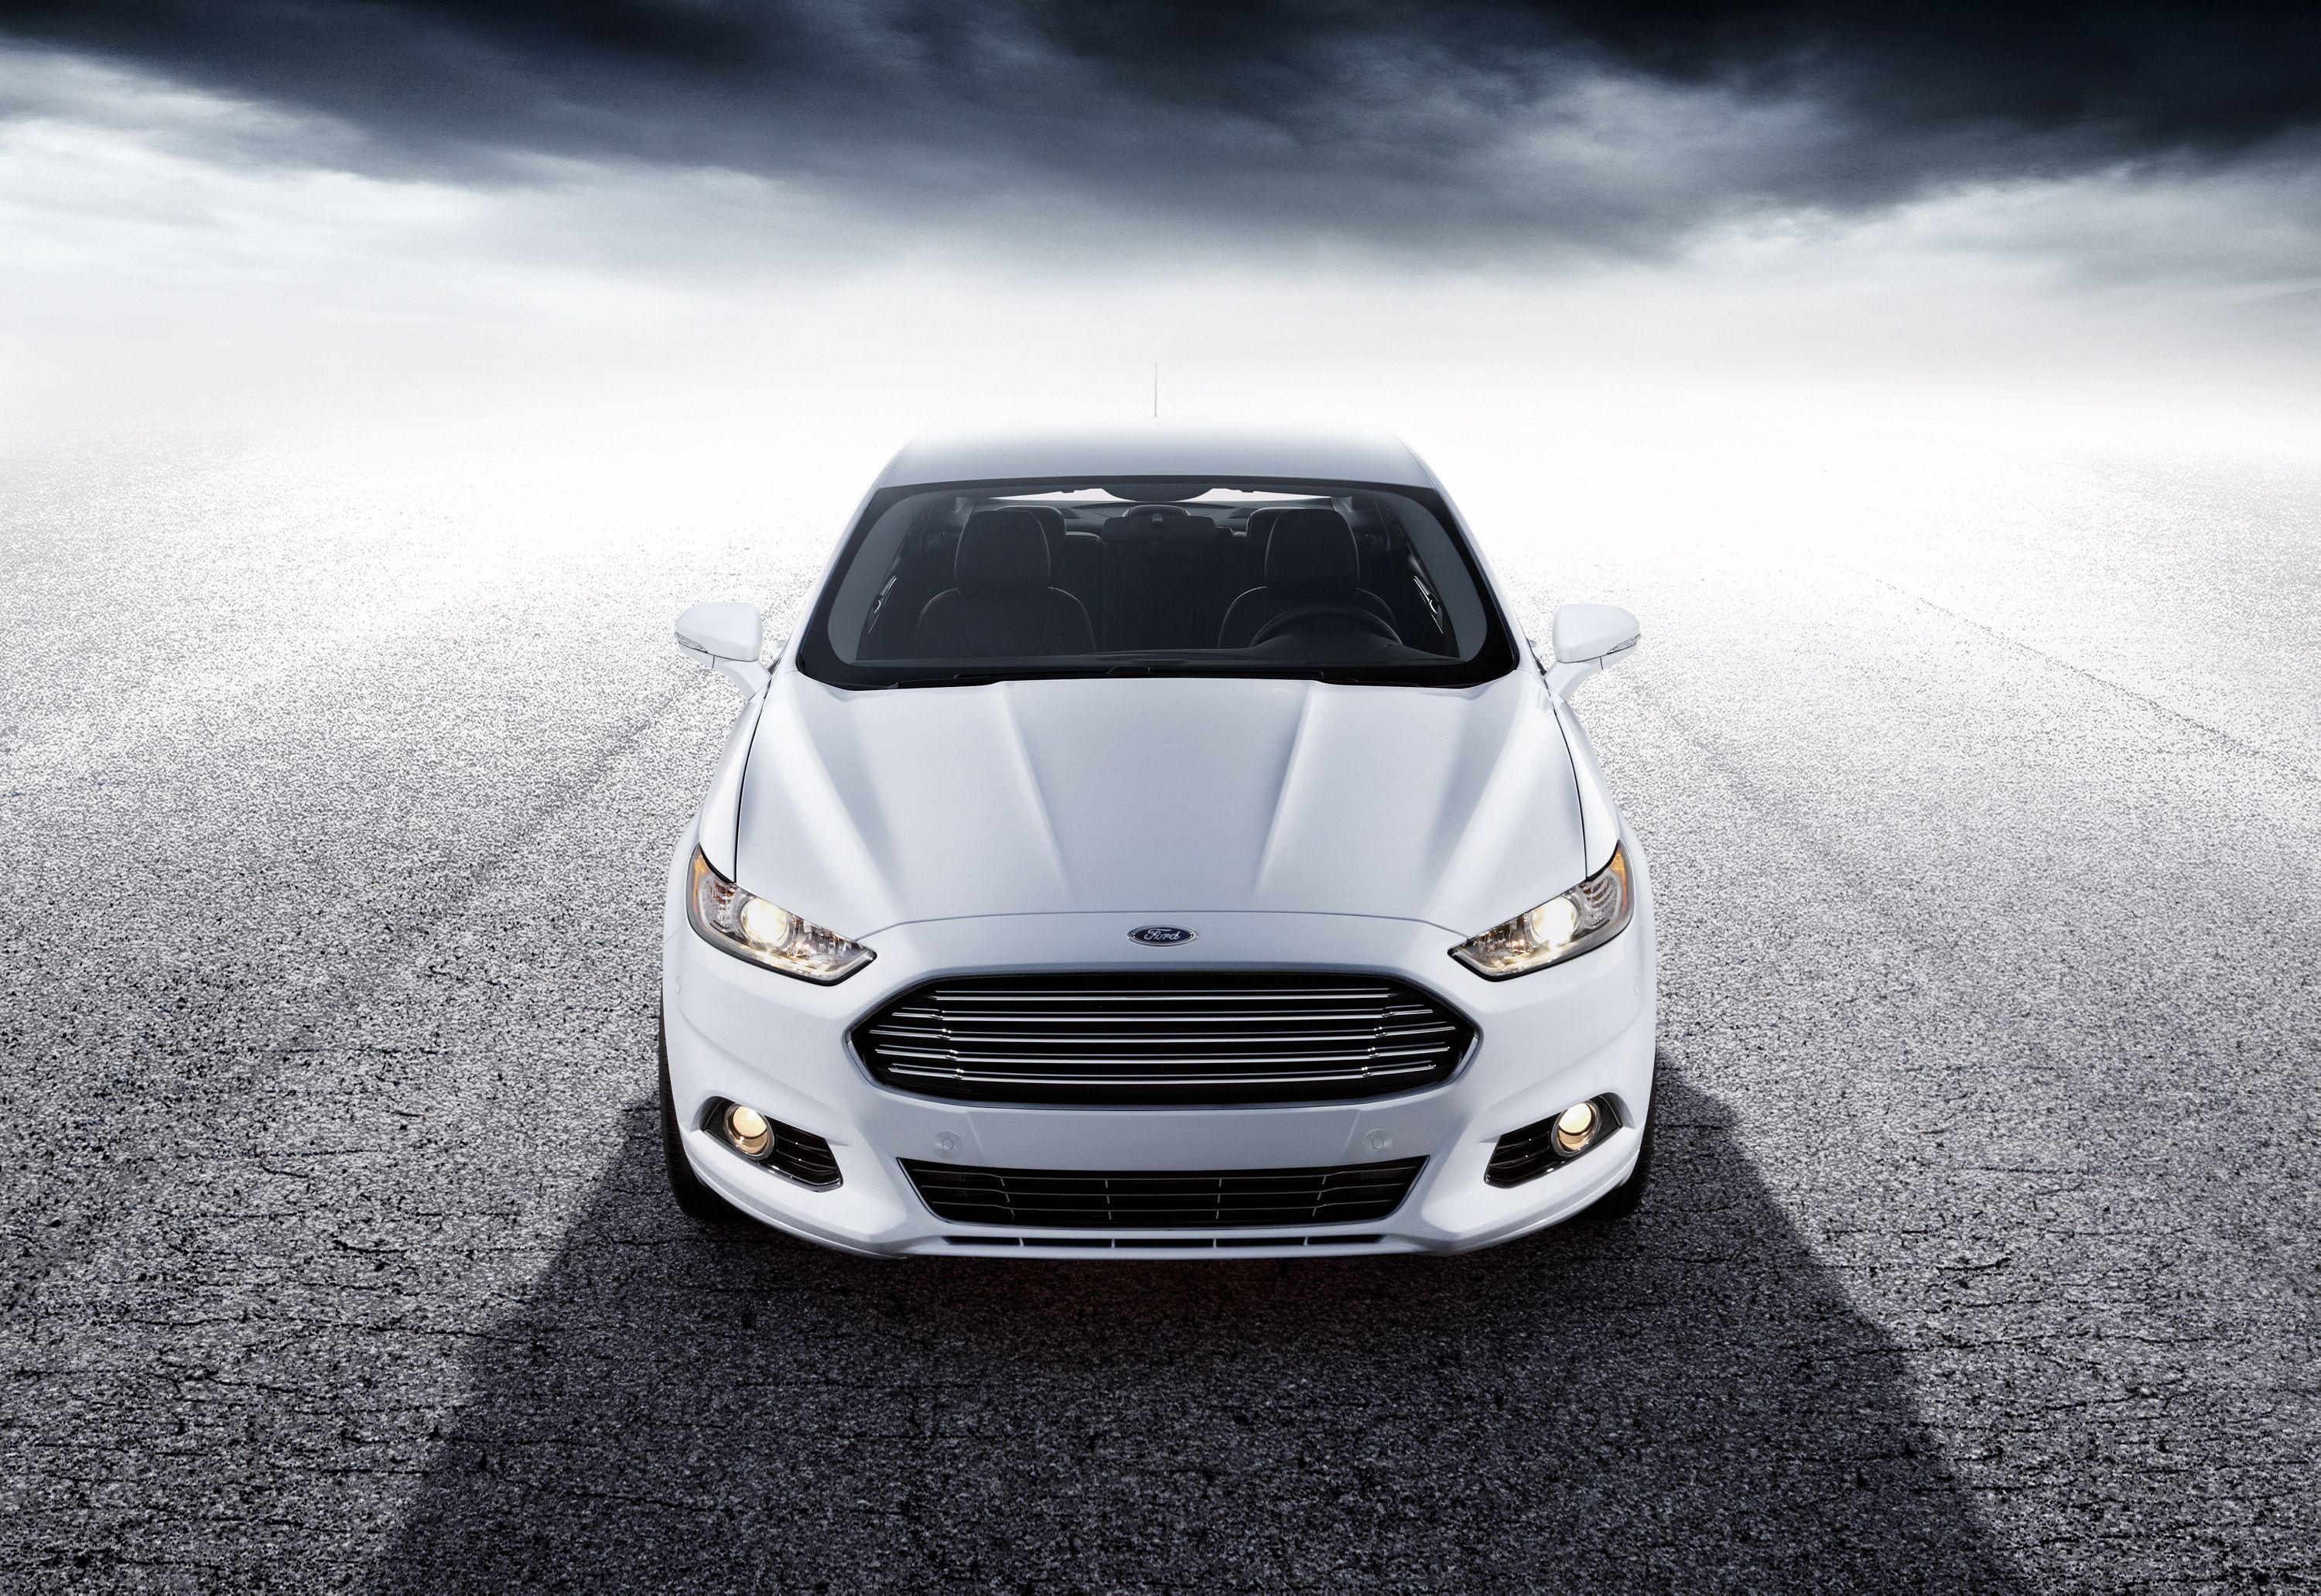 Ford Fusion Wallpapers - Top Free Ford